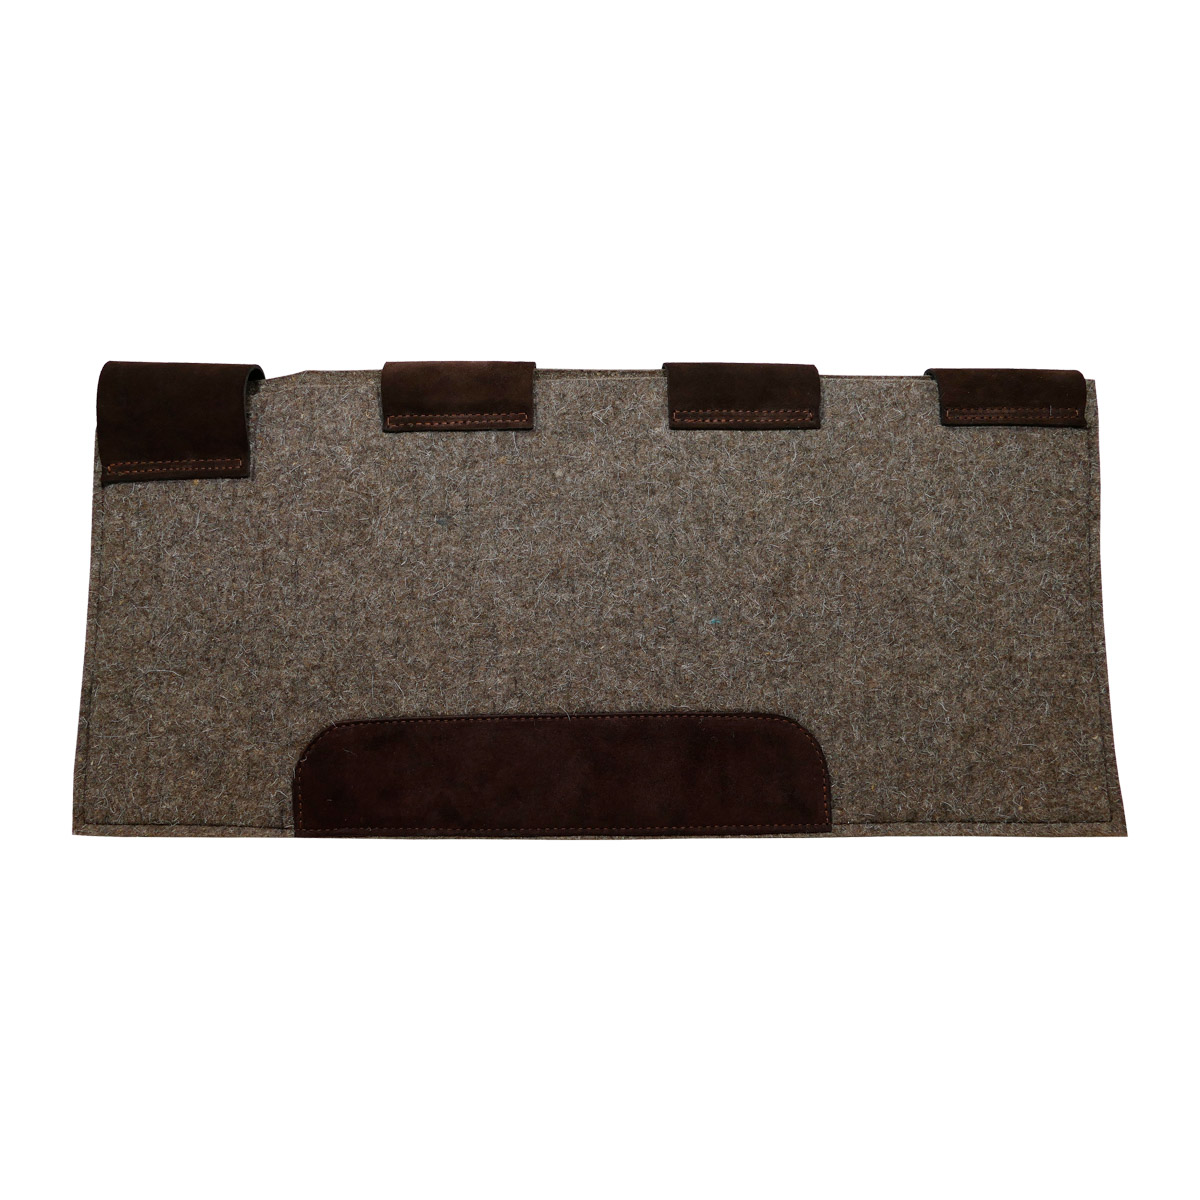 Saddle Pad, Kent Saddlery, Square Felt with Chambers and Leather Trim, 3/4" 1